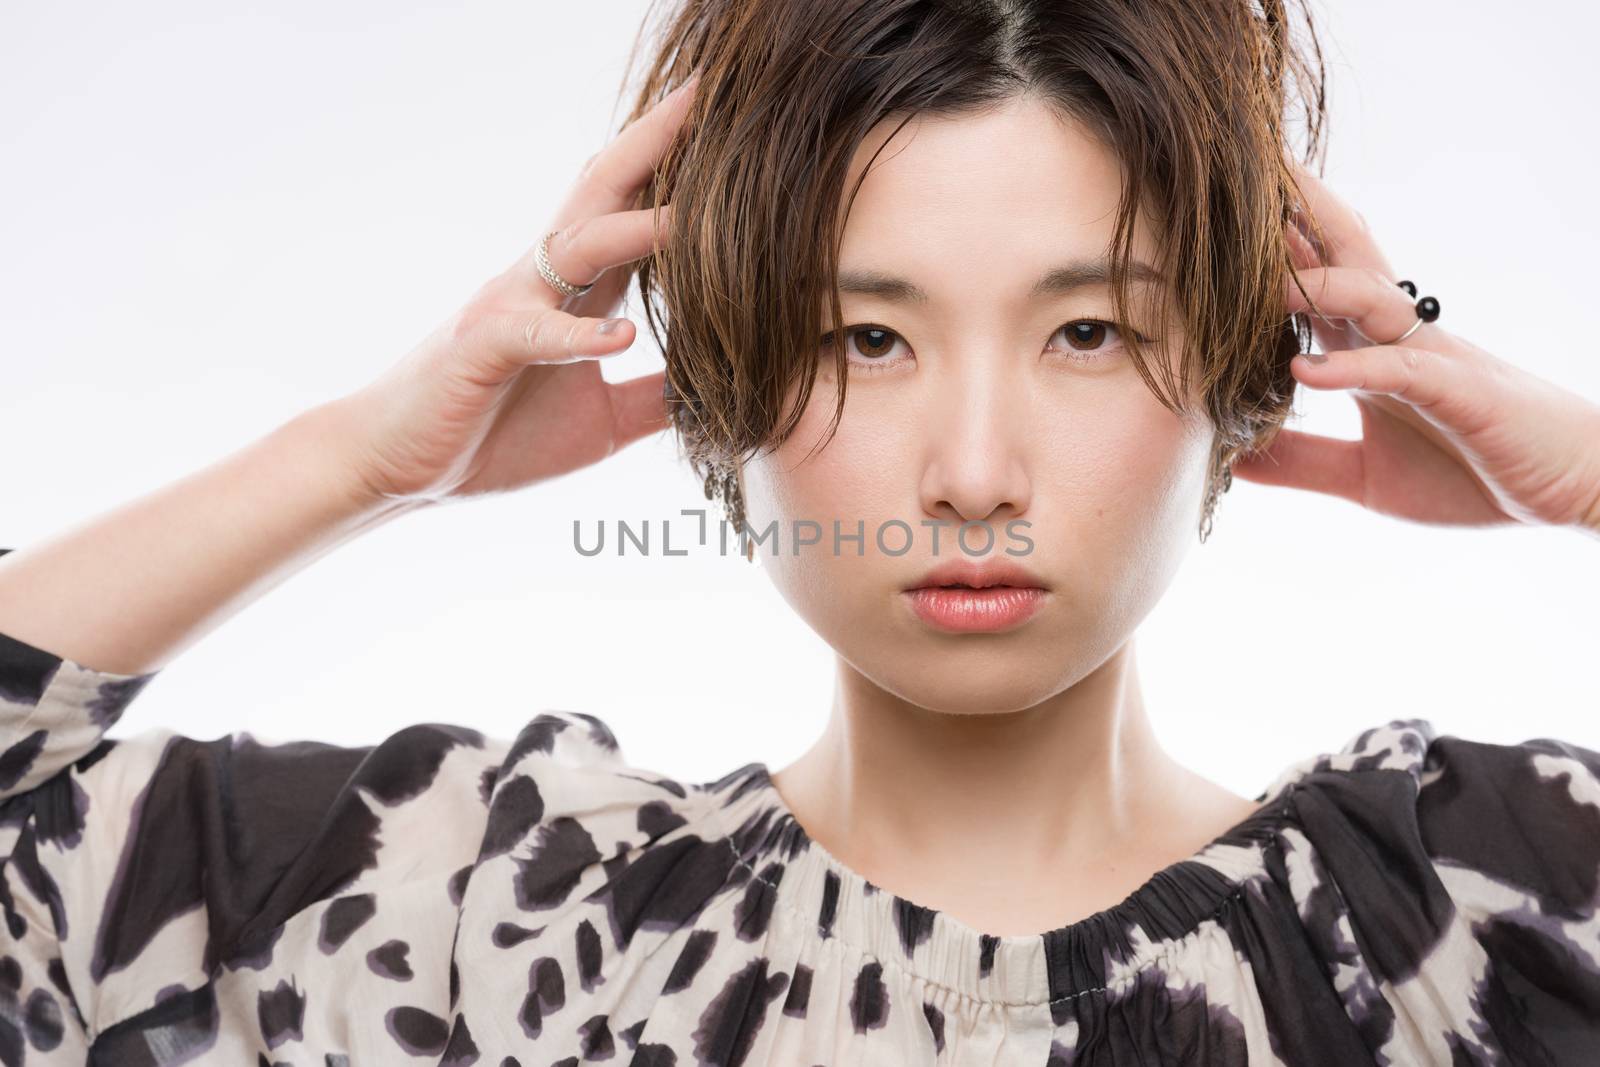 A high key headshot of a young and beautiful Japanese woman in a strong and confident pose on a white background.